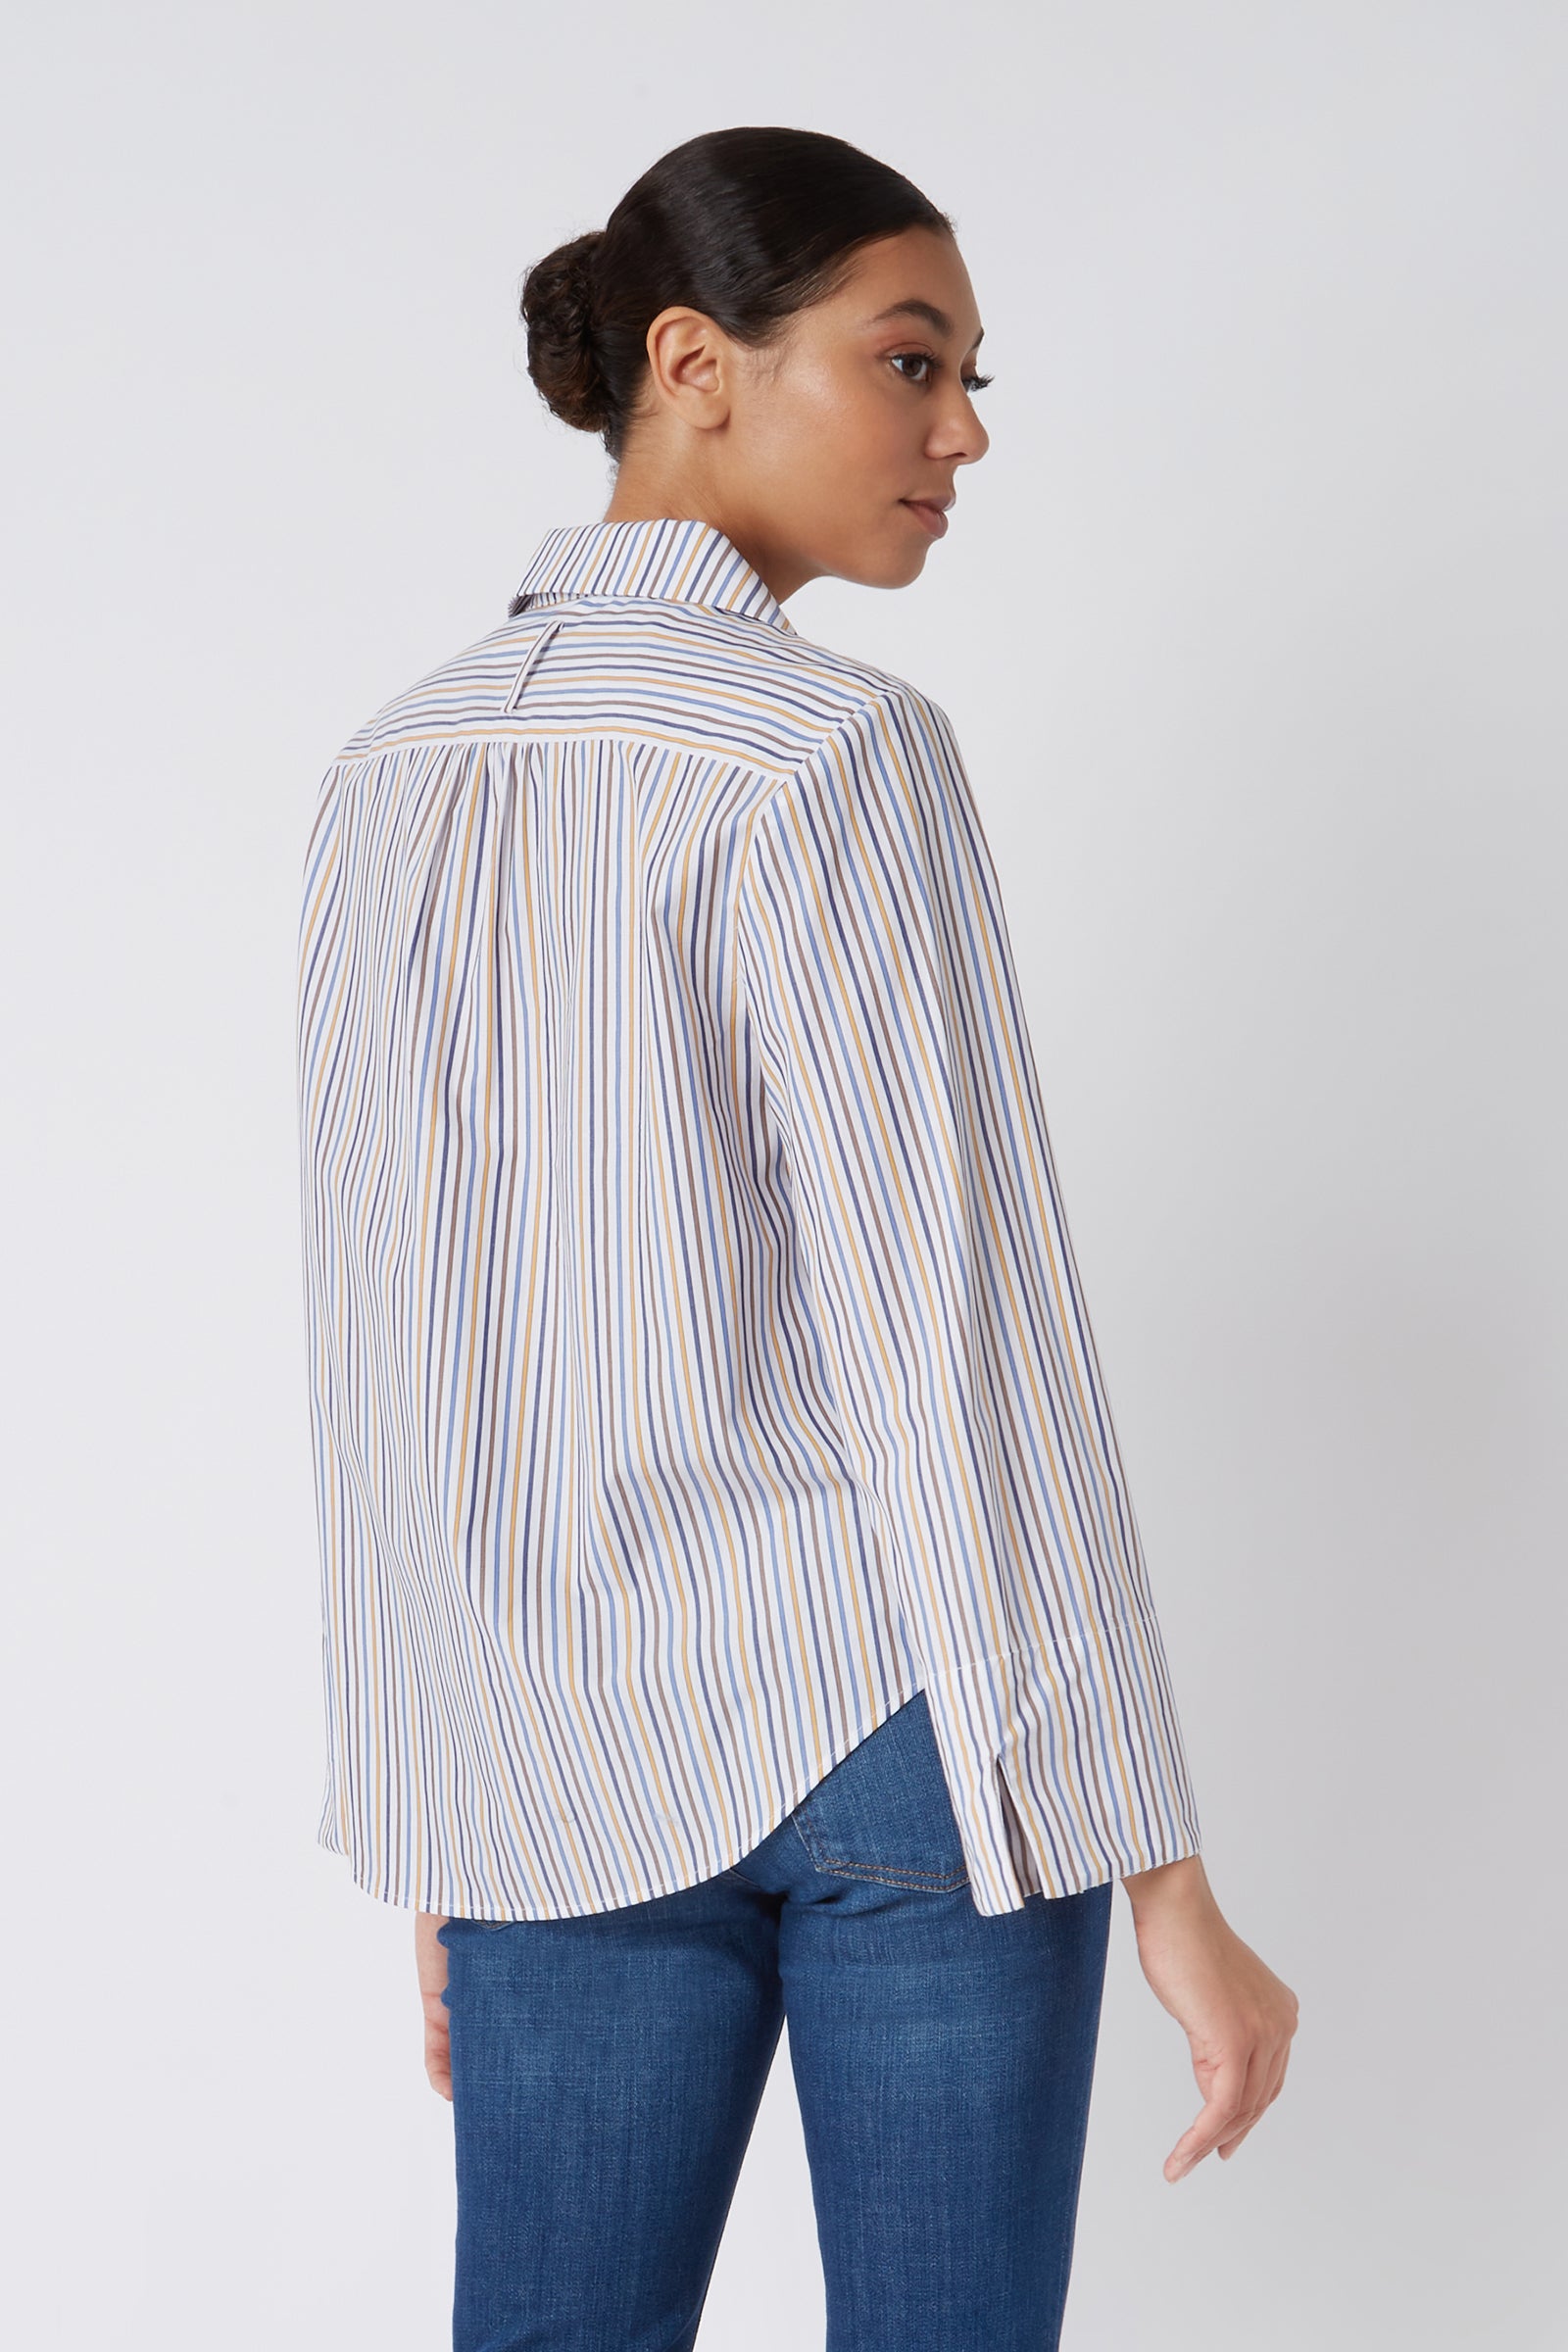 Kal Rieman Edie Collared Placket Shirt in Multi Stripe Gold on Model Cropped Back View